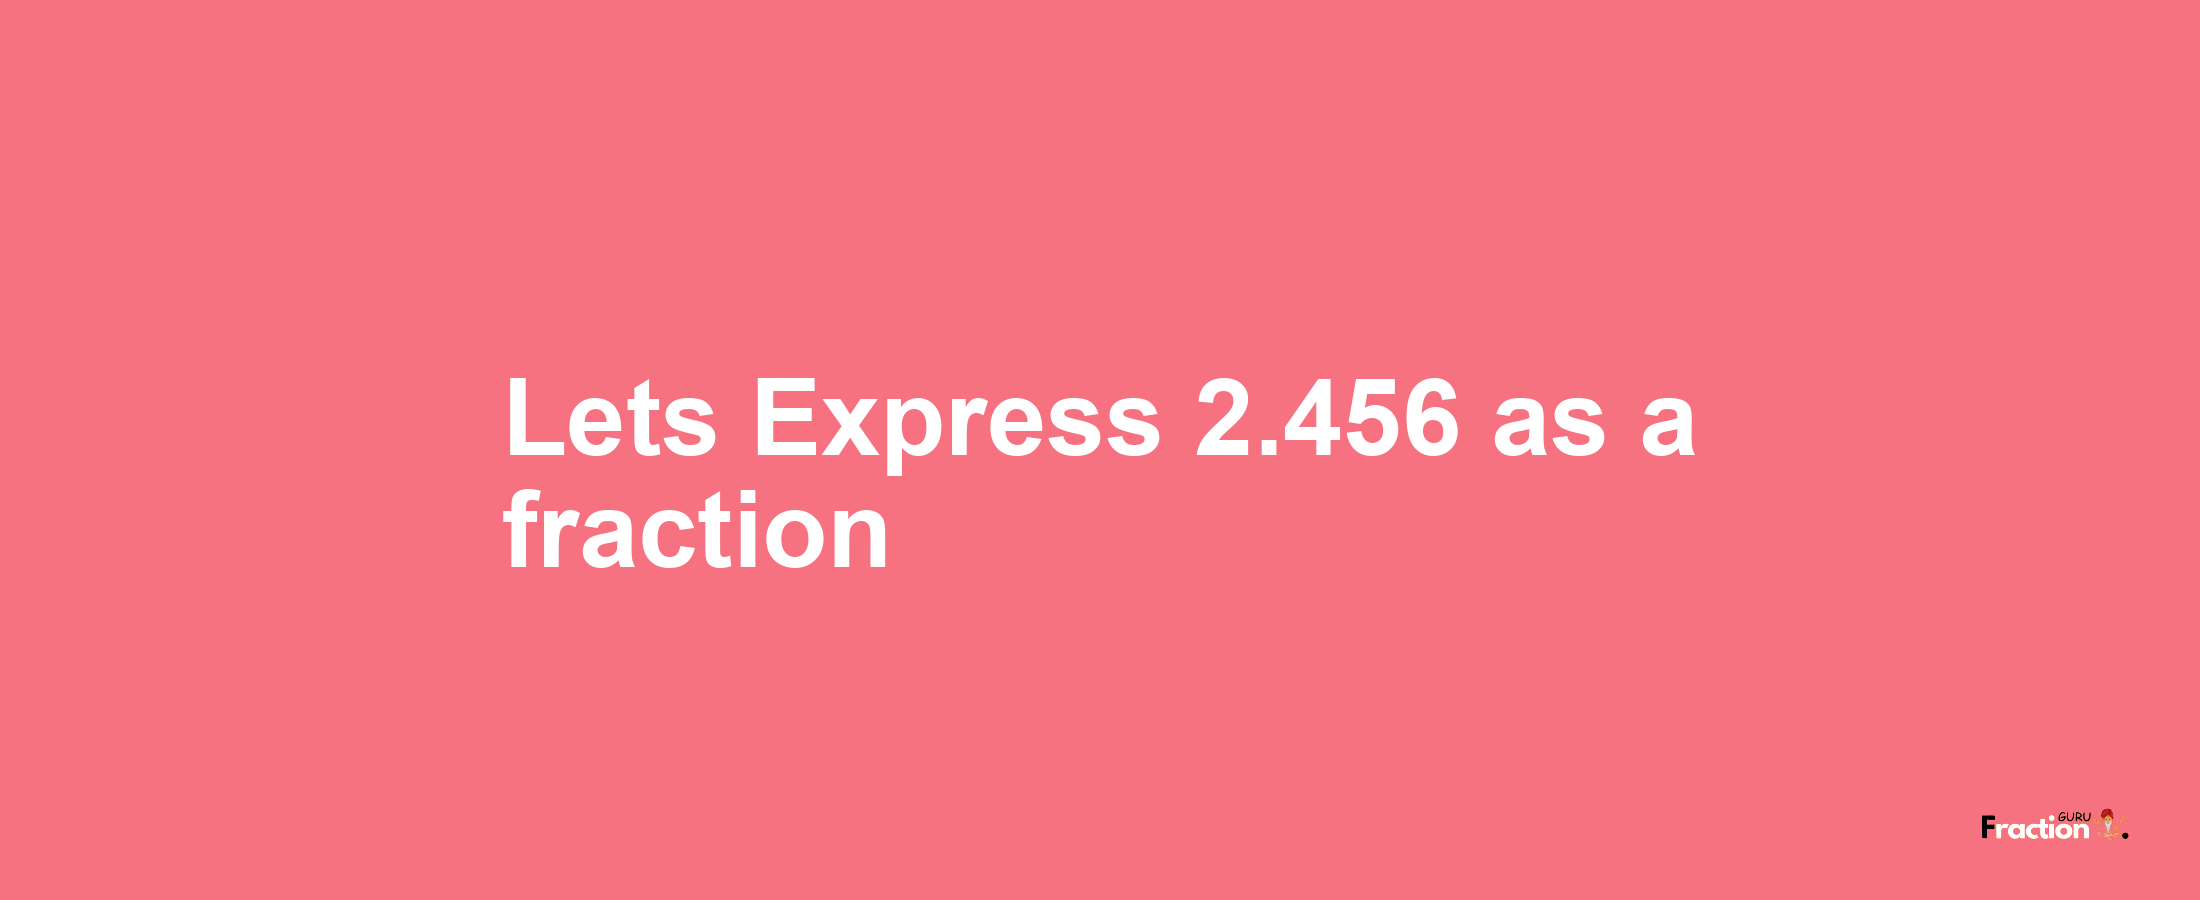 Lets Express 2.456 as afraction